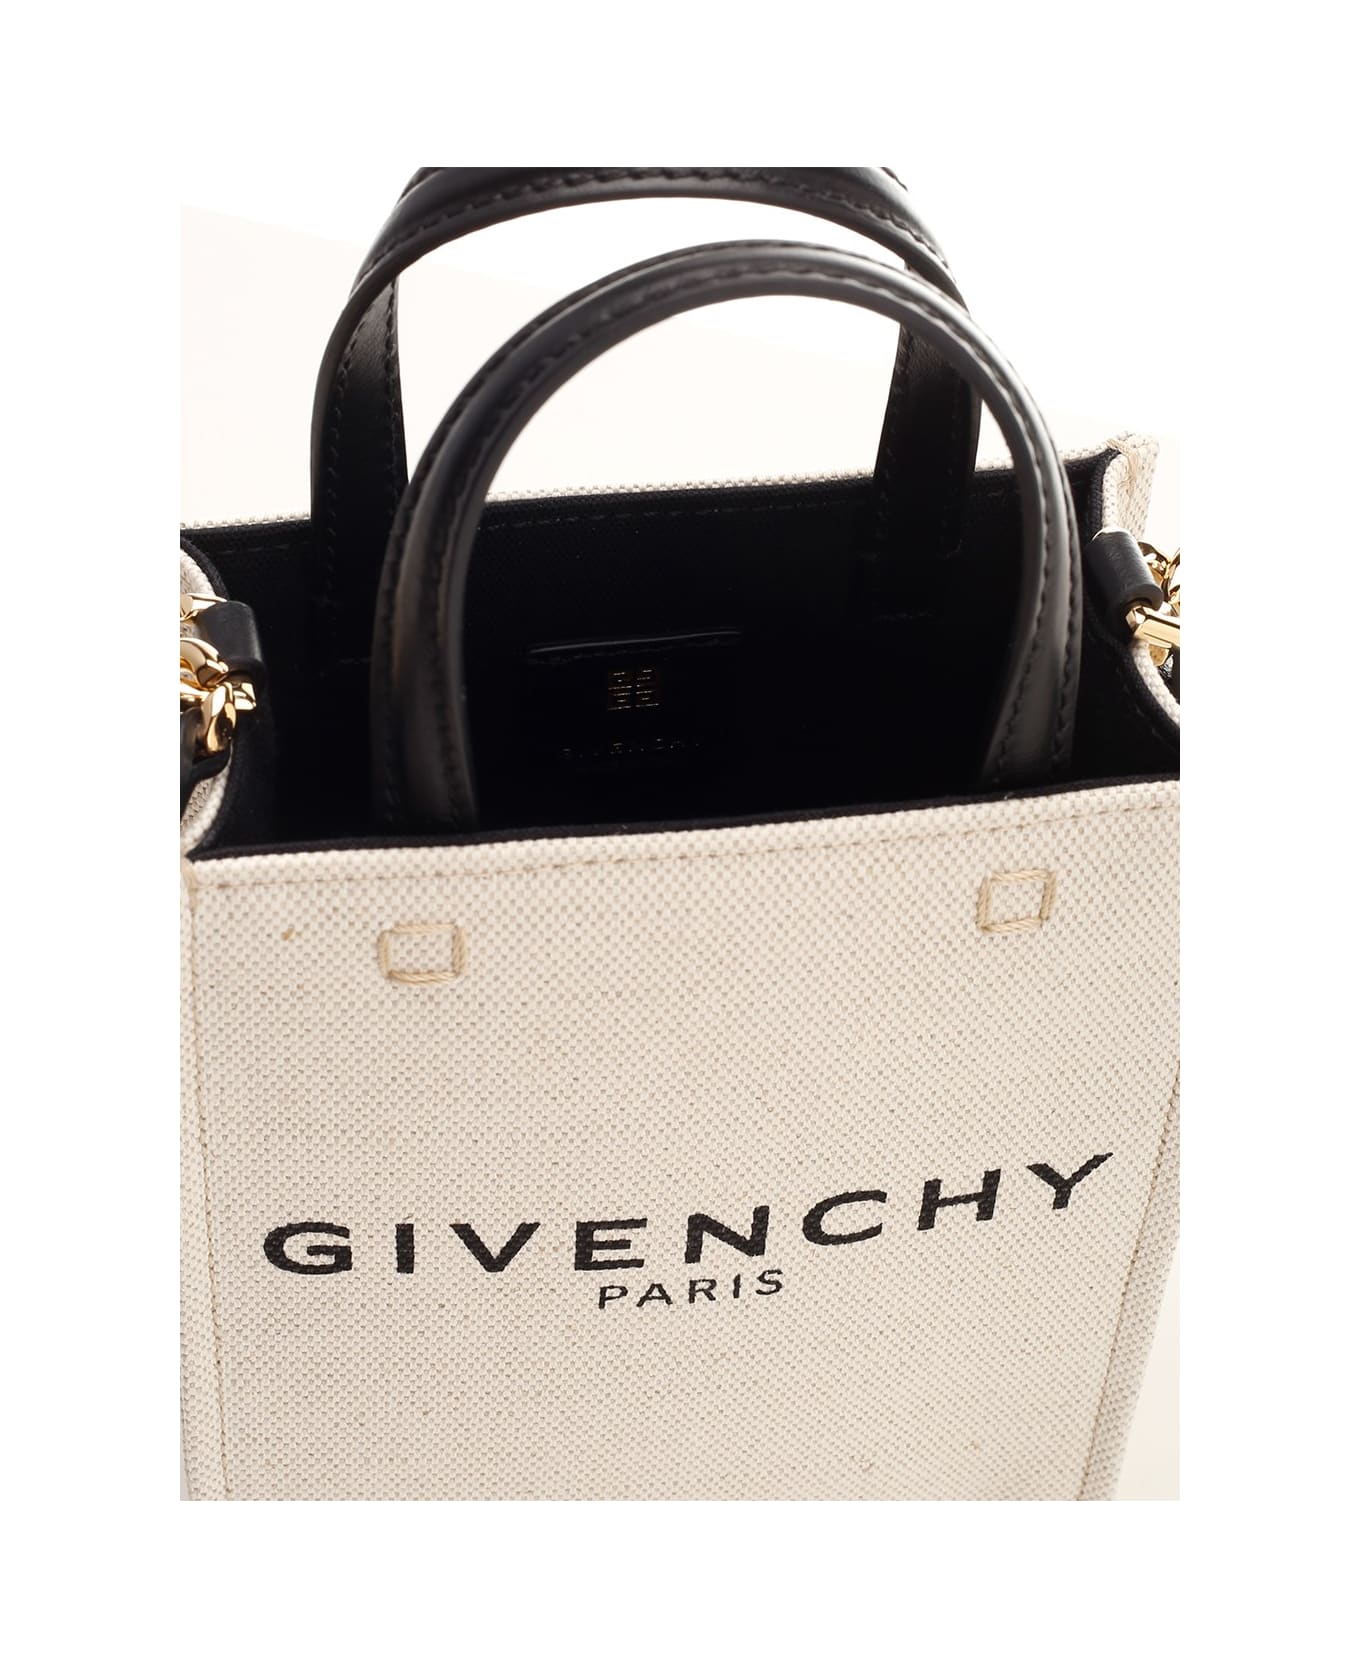 Givenchy 'g Tote' Mini Bag - Beige トートバッグ